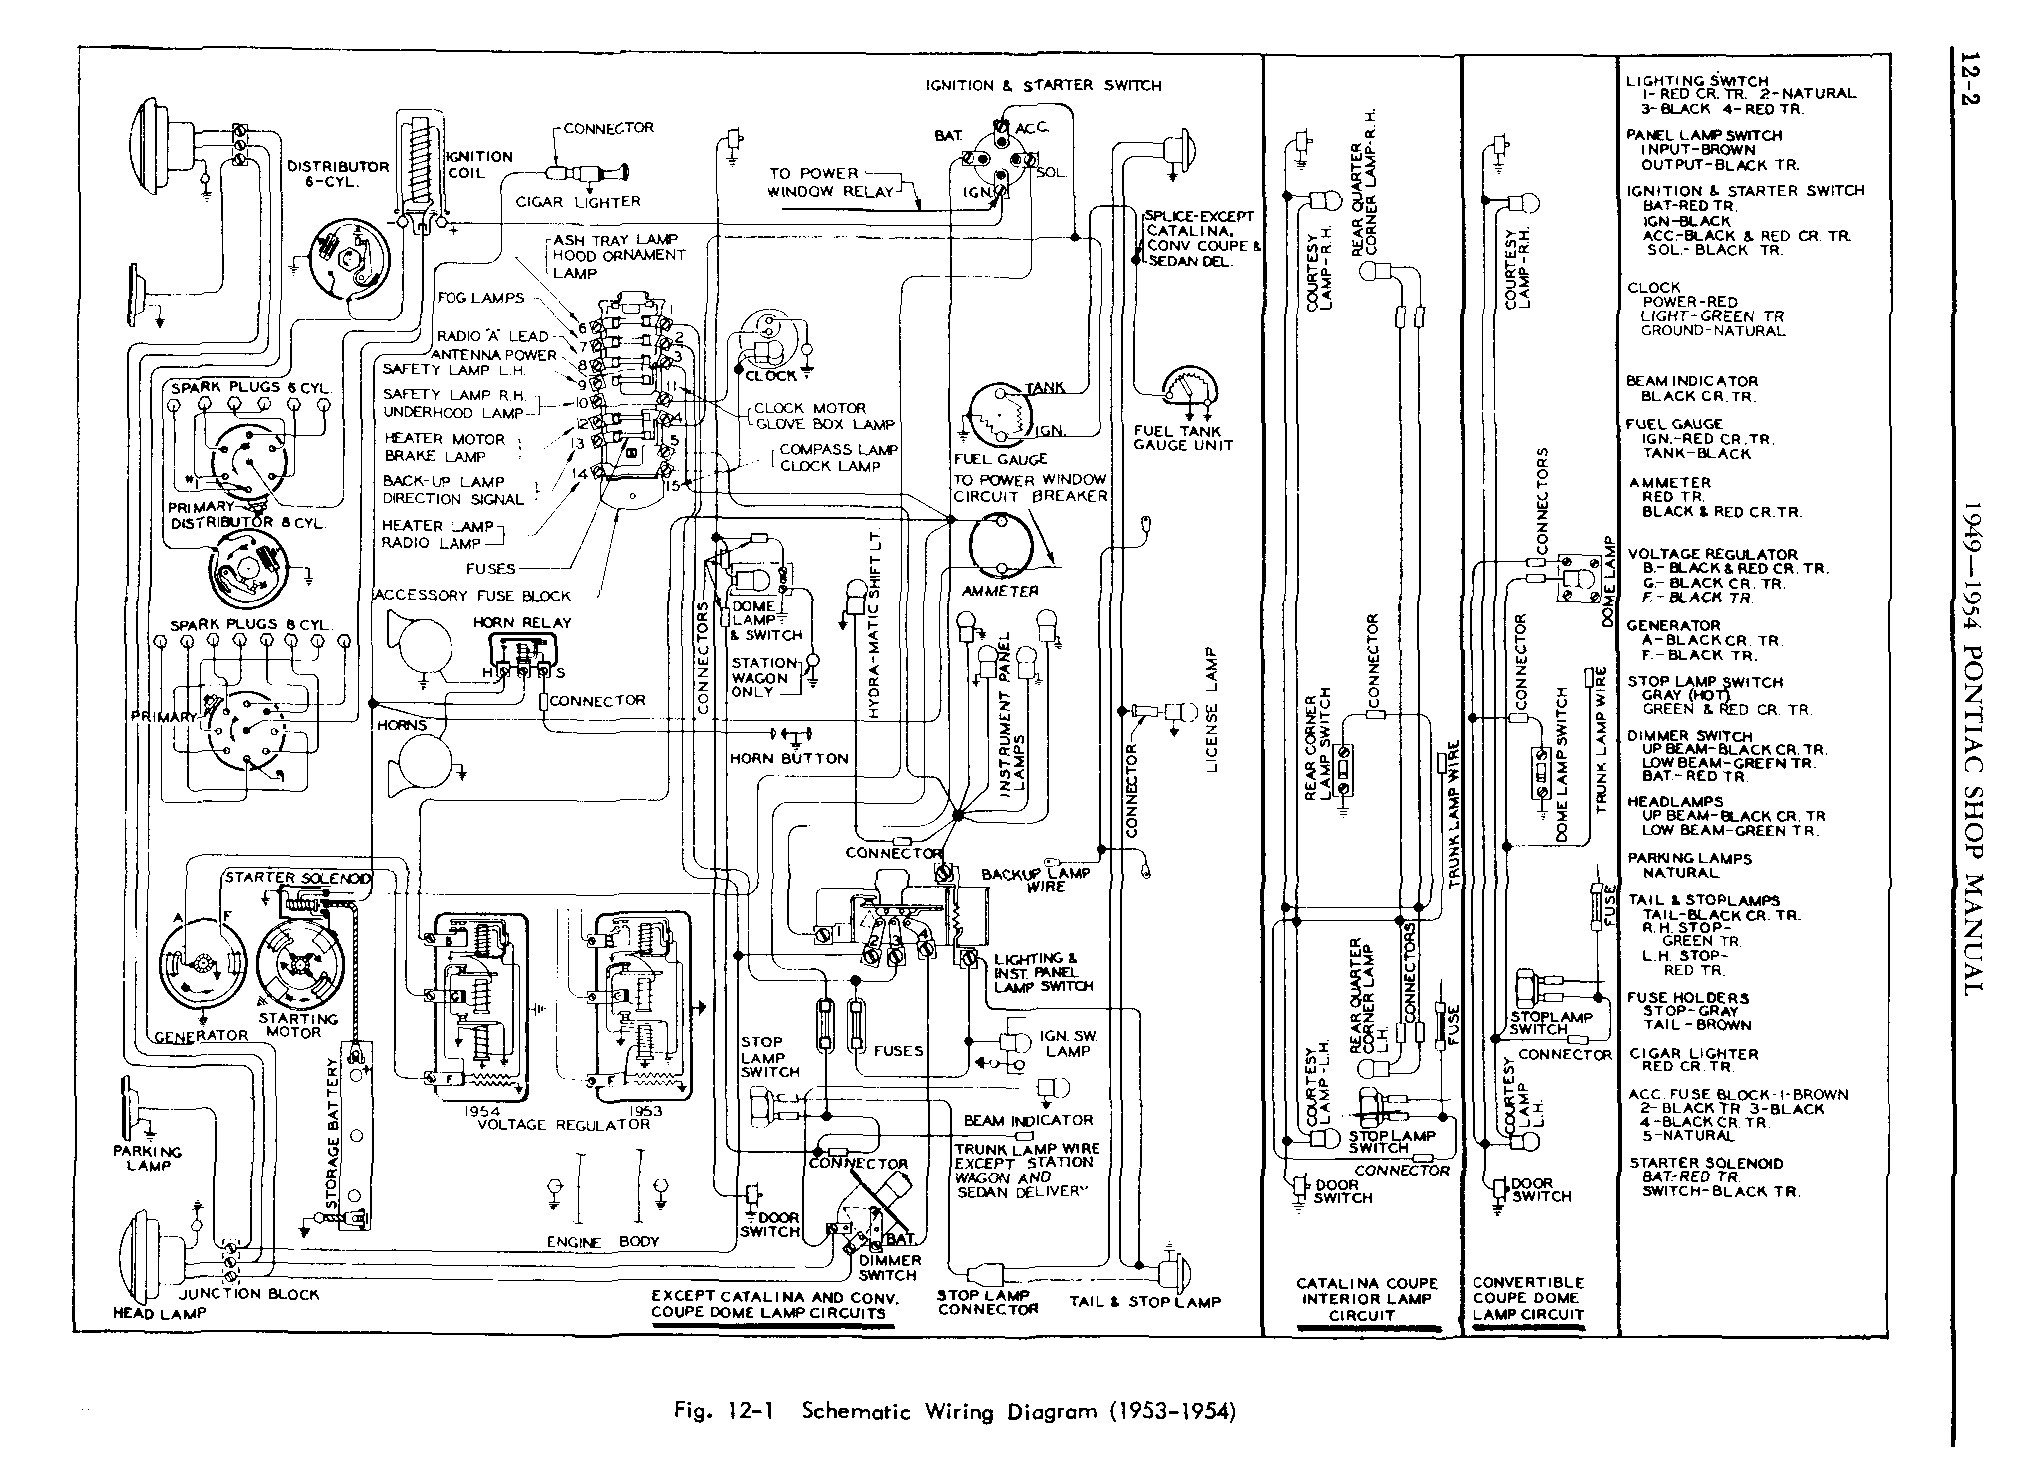 1949 Pontiac Shop Manual- Electrical and Instruments Page 2 of 54